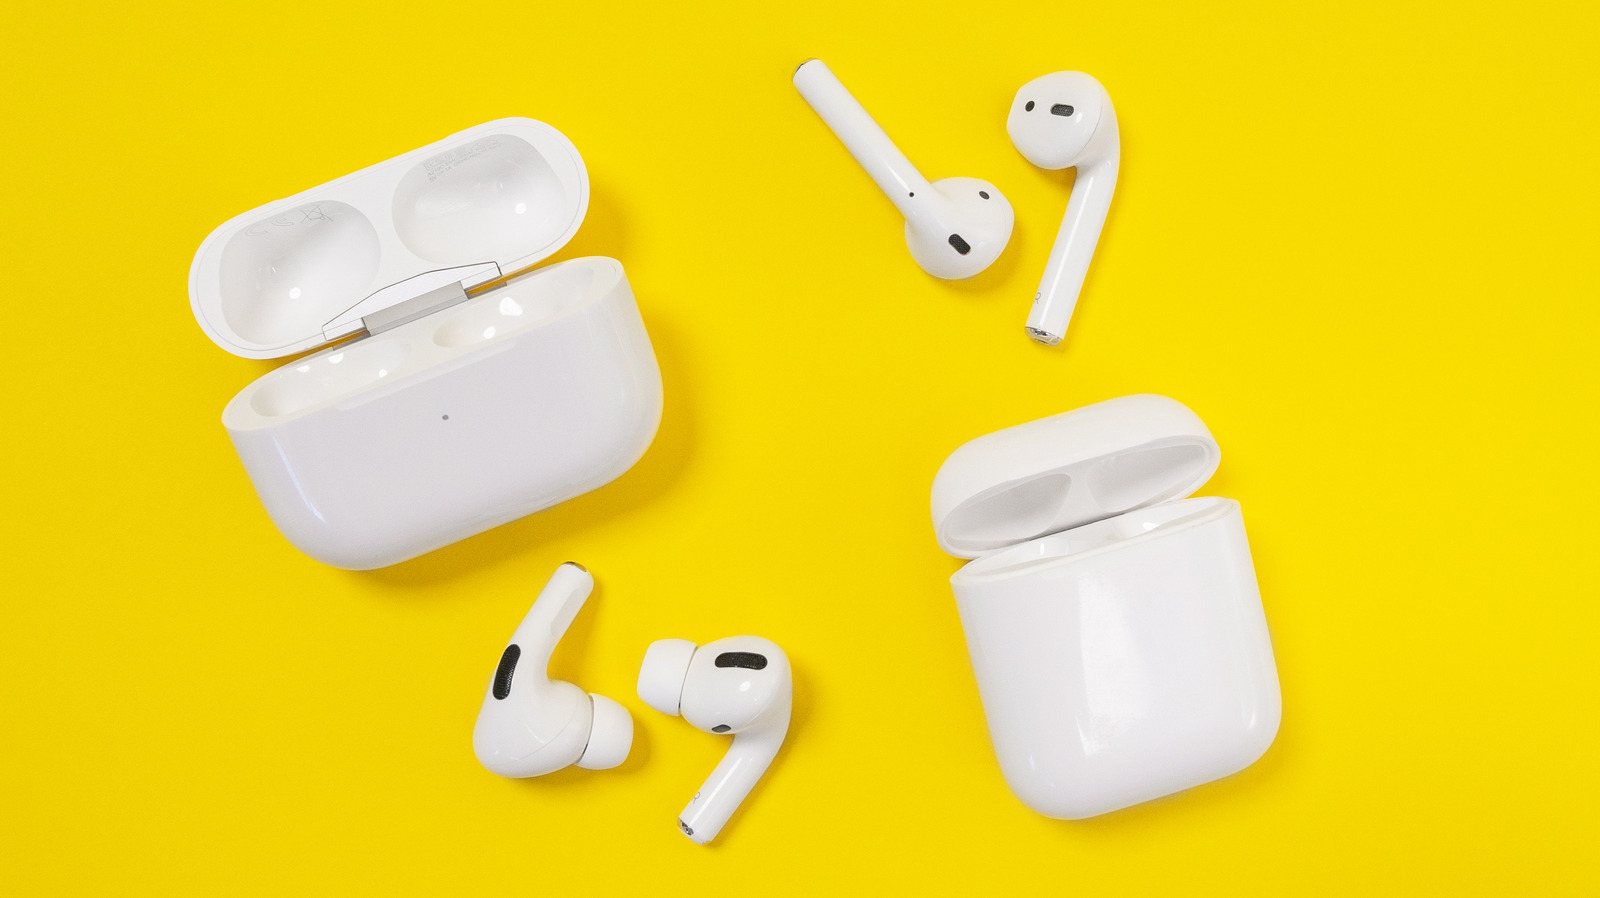 Fake AirPods: How to tell if AirPods/AirPods Pro are fake